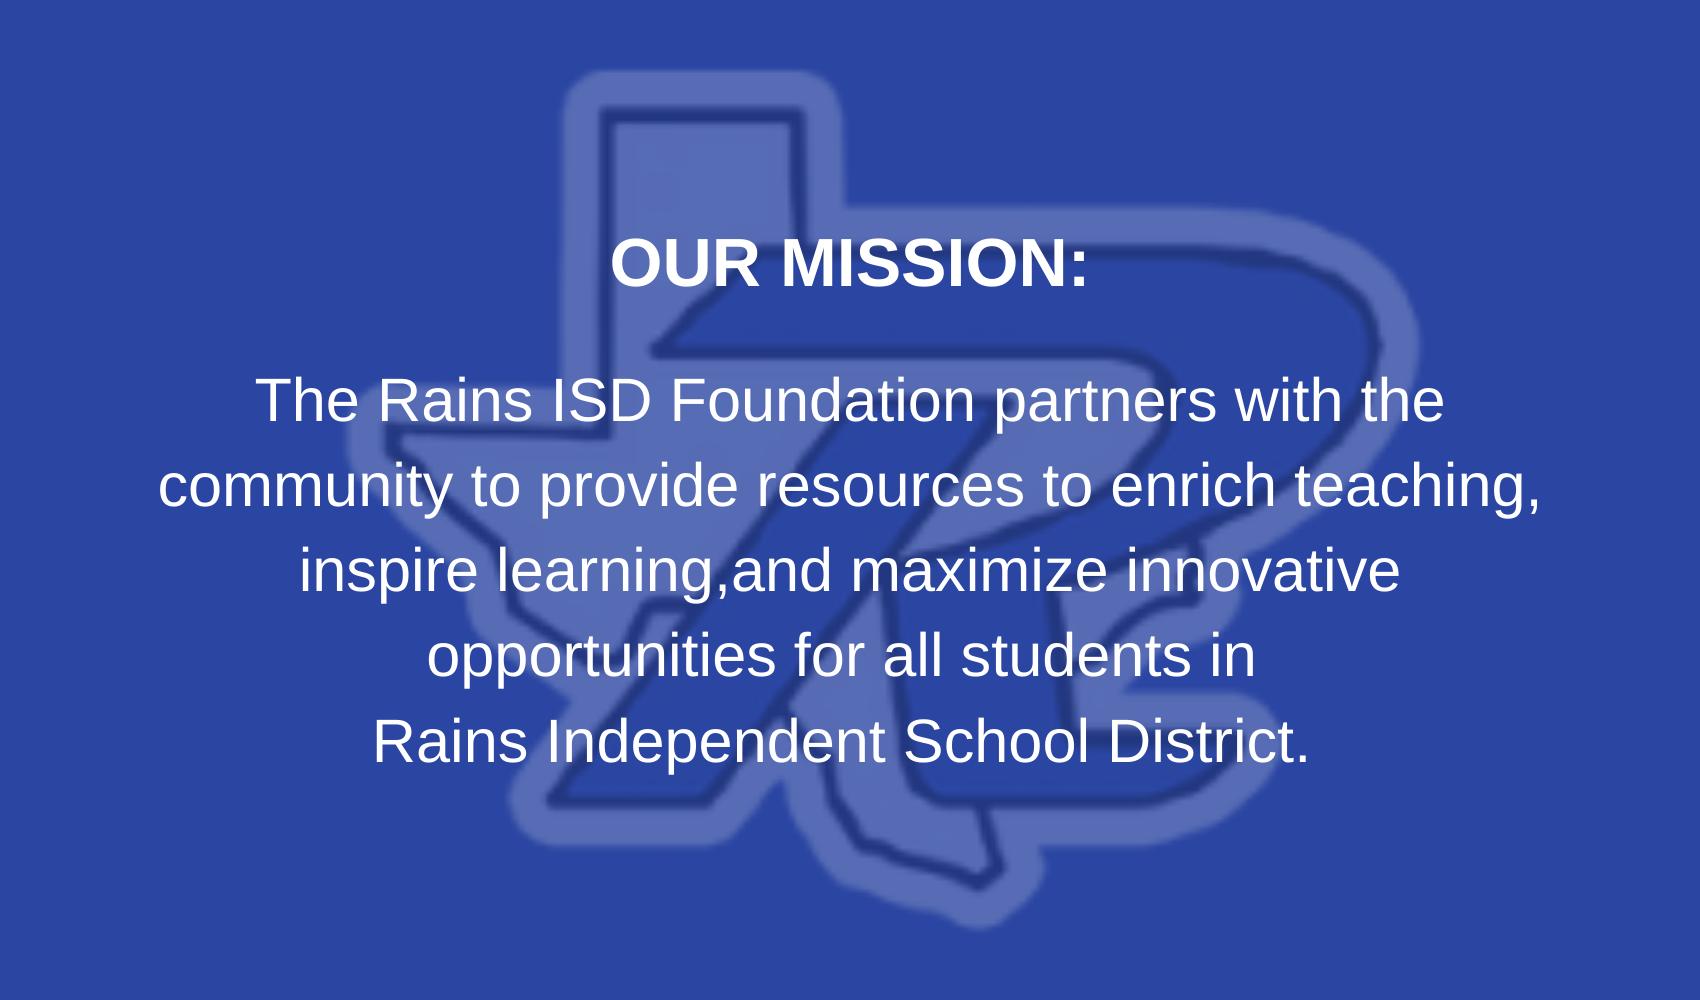 Misson: The Rains ISD Foundation partners with the community to  provide resources to enrich teaching, inspire learning, and maximize innovative opportunities for all students in  Rains Independent School District. 